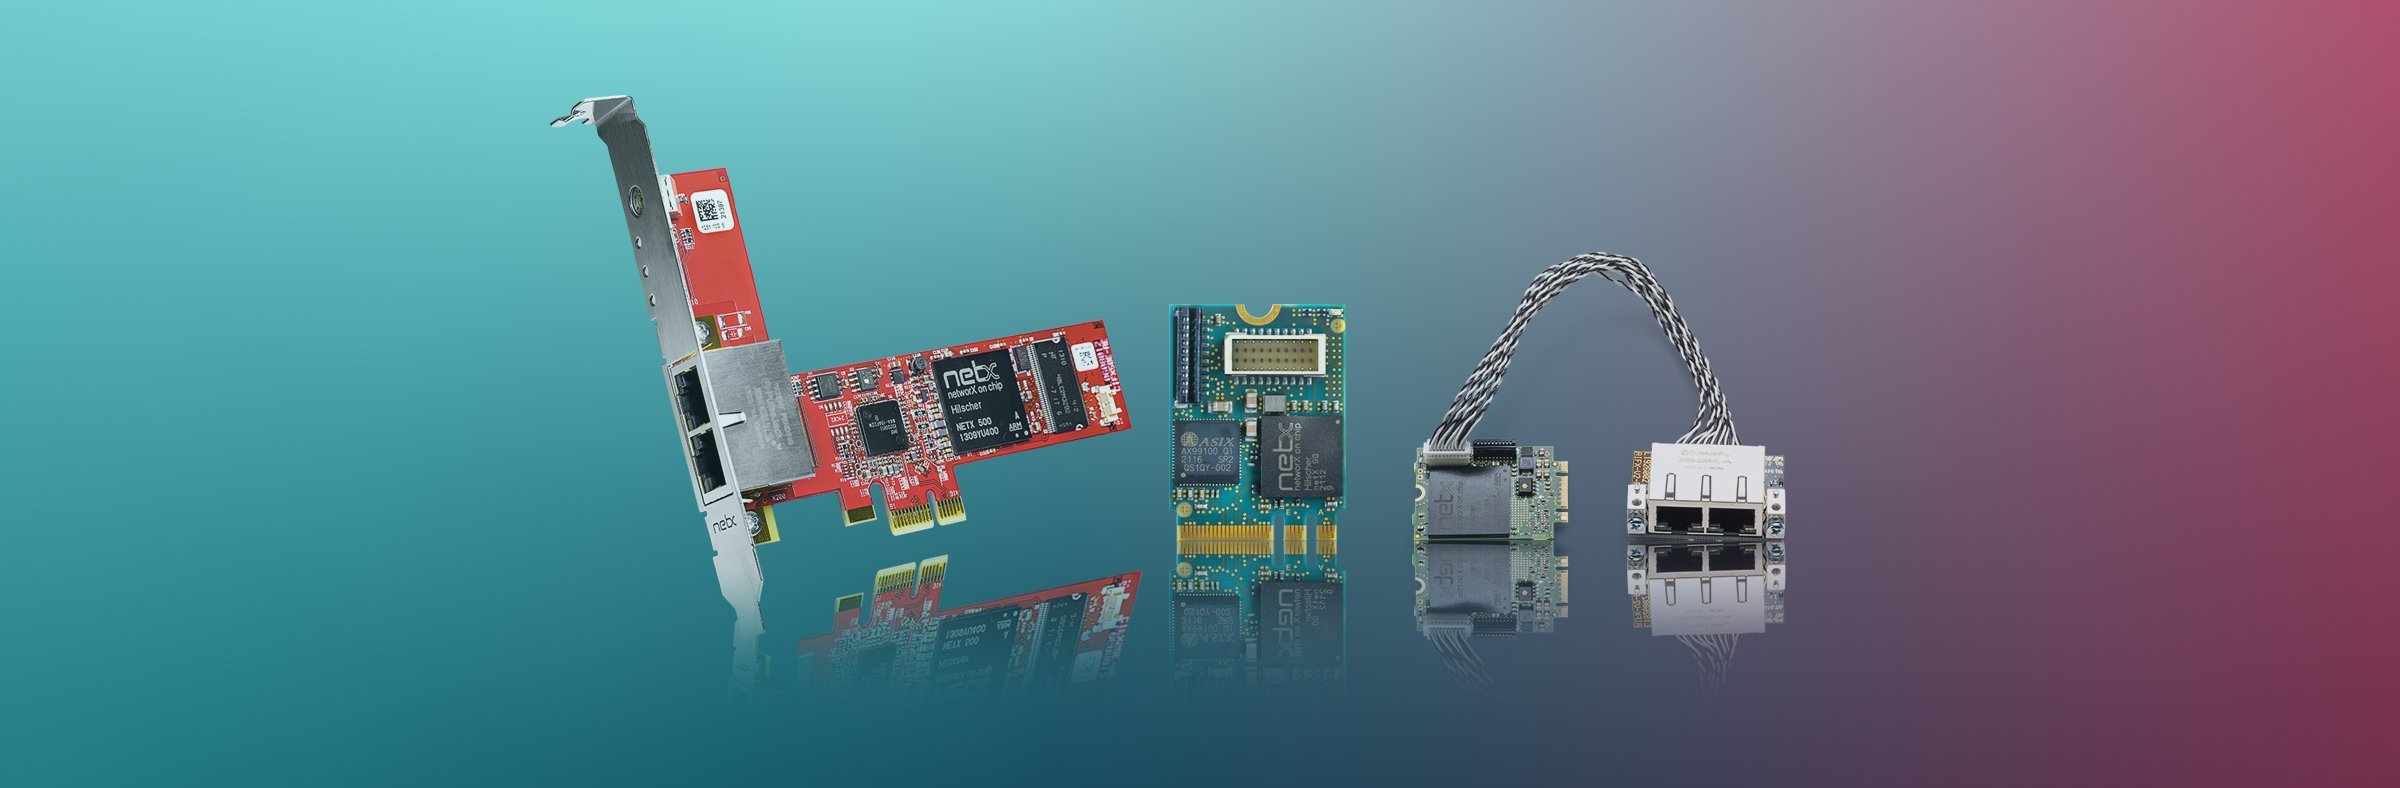 Three PC cards on a colorful background. One has a red PCB while the other two are green. One has an AIFX detached network interface connected to it.